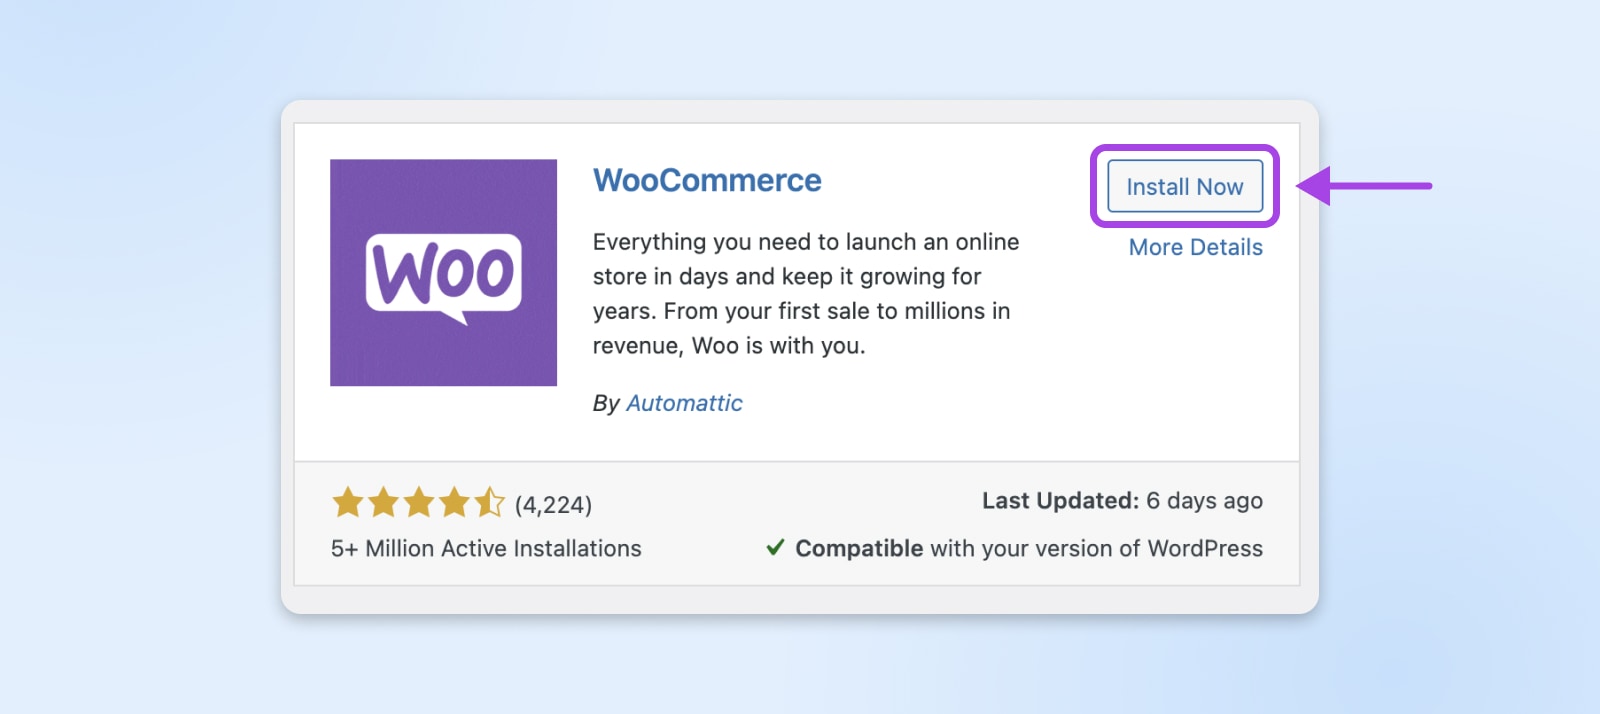 woocommerce plugin screenshot pointing out the "install now" button in the right-hand corner of the box